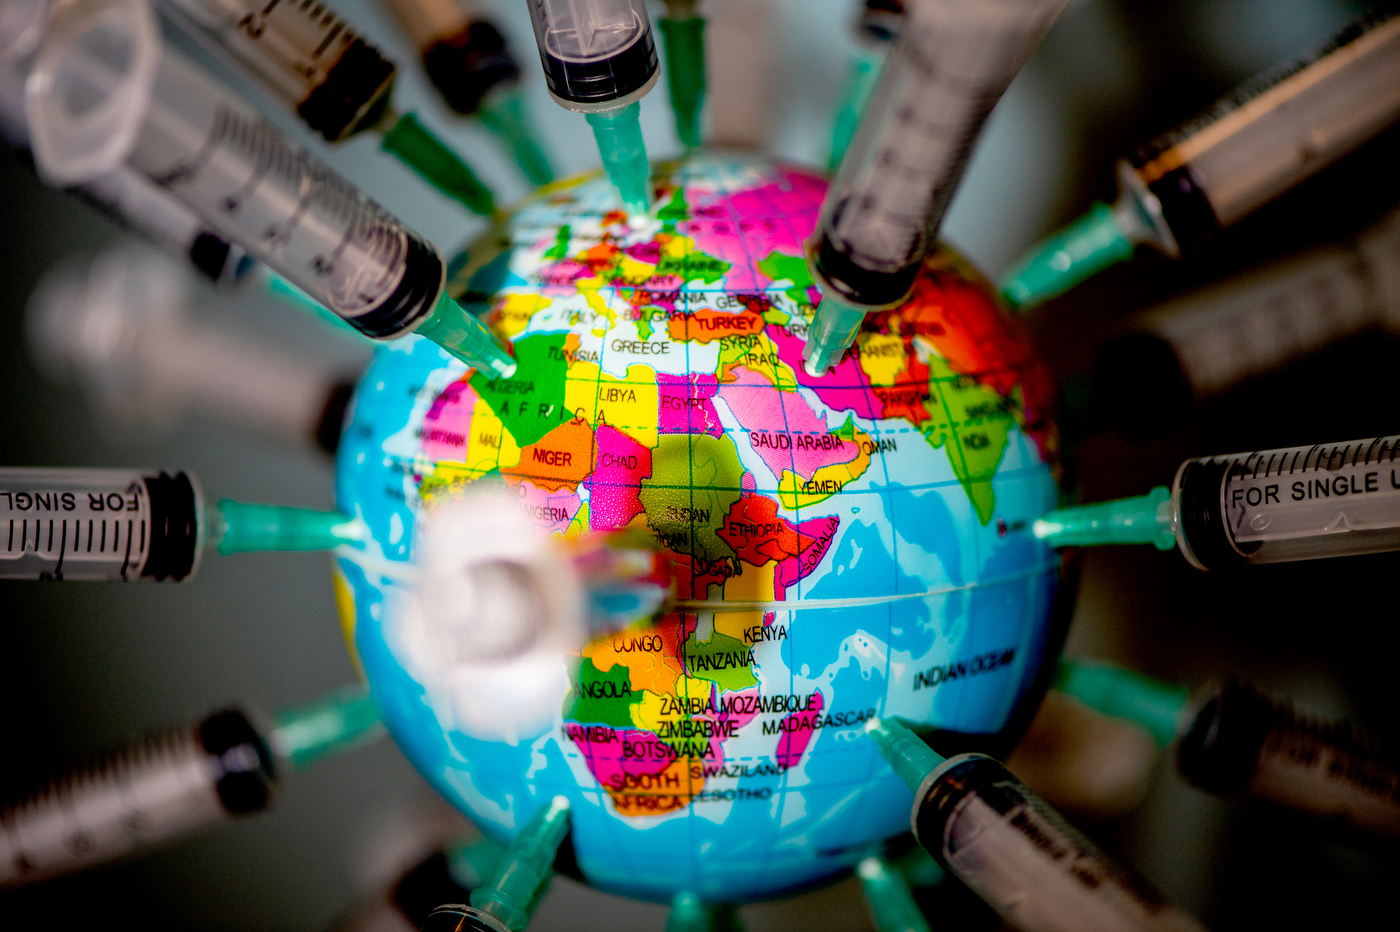 syringes stuck in a globe